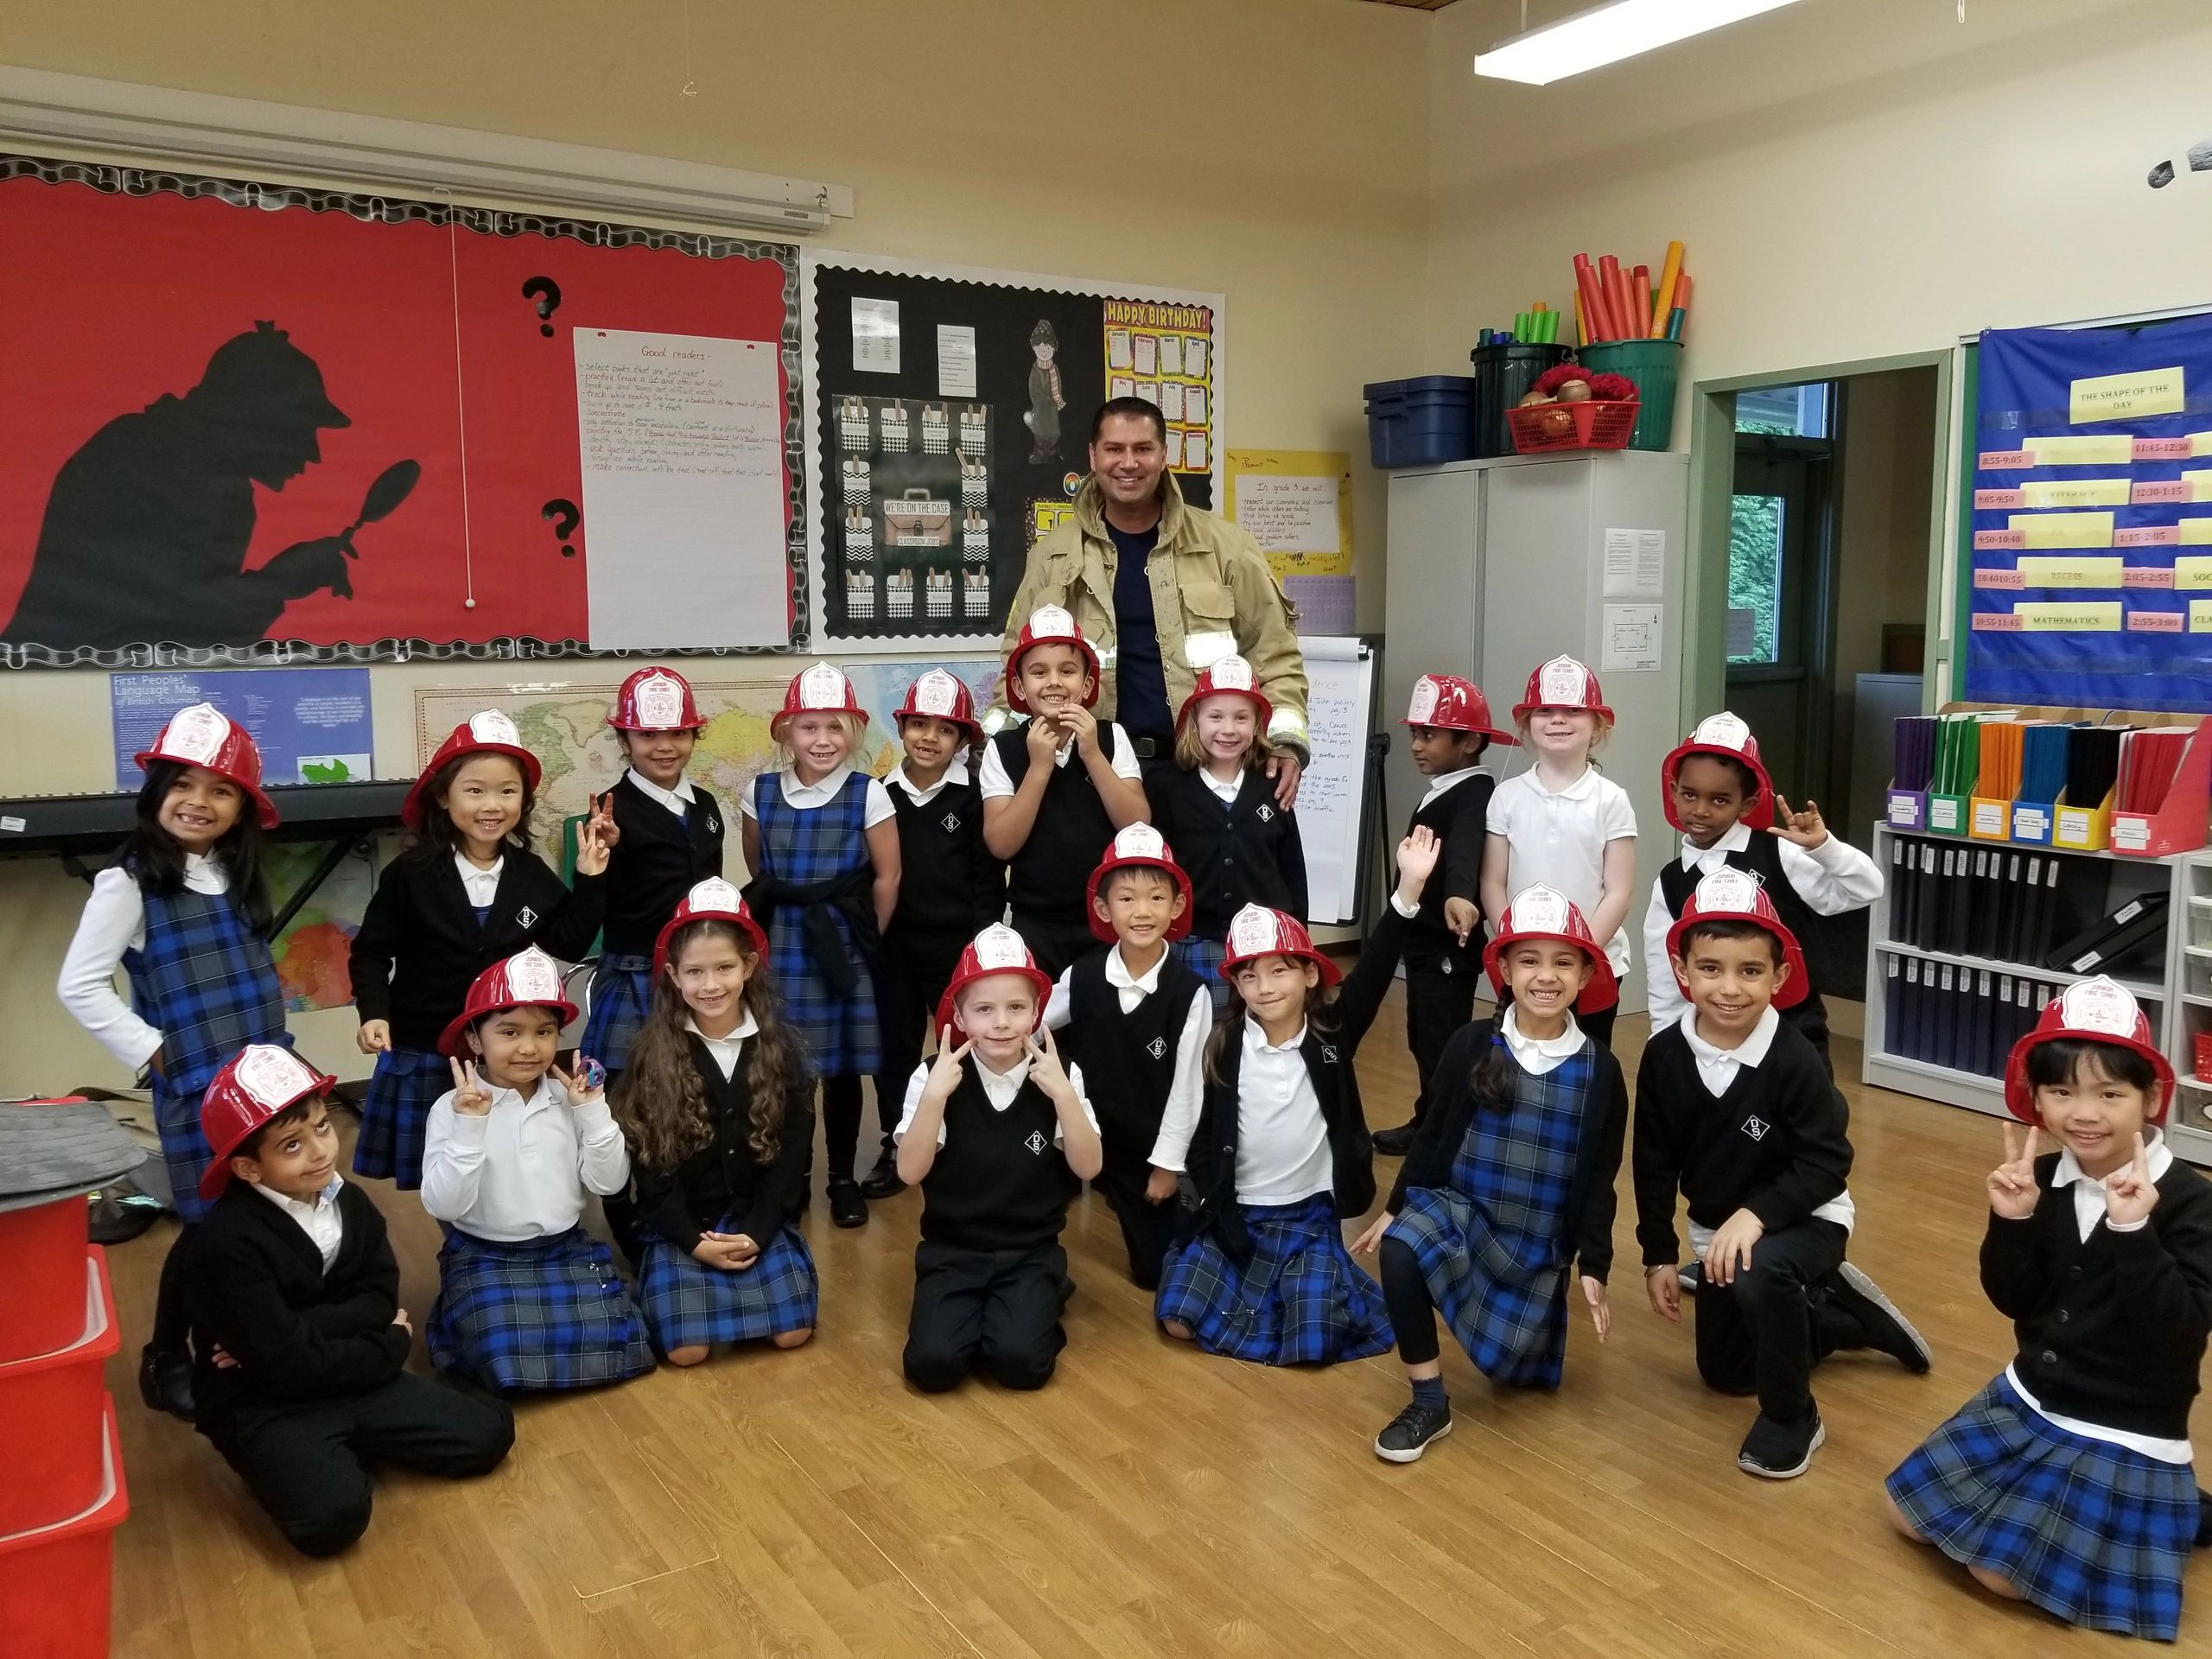 A young class wearing school uniforms and plastic firefighter hats pose with a visiting firefighter